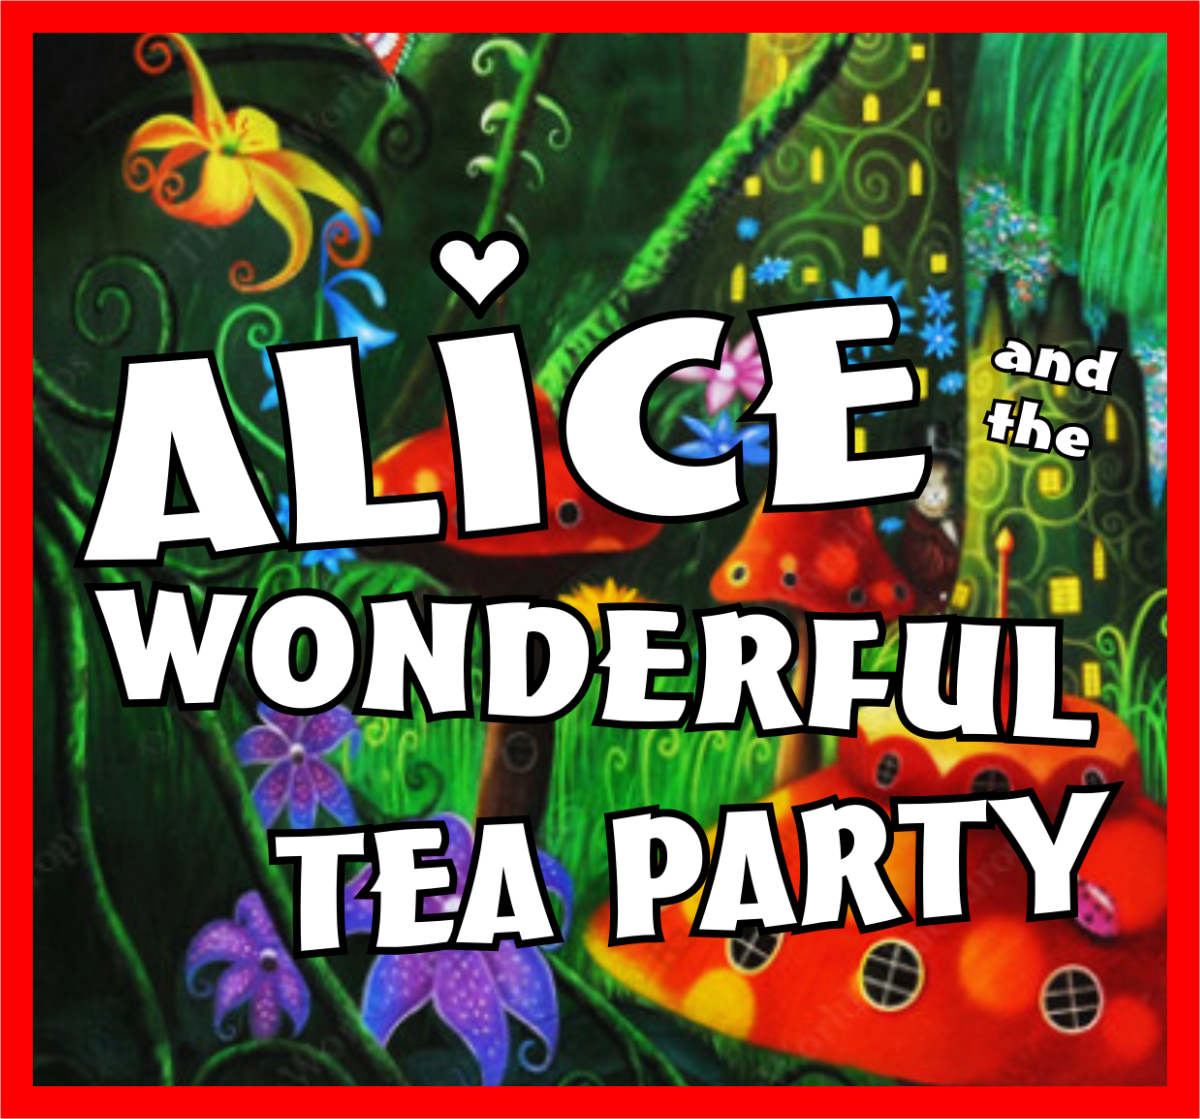 Alice and the Wonderful Tea Party – A Wonderful Wonderland Musical for all ages